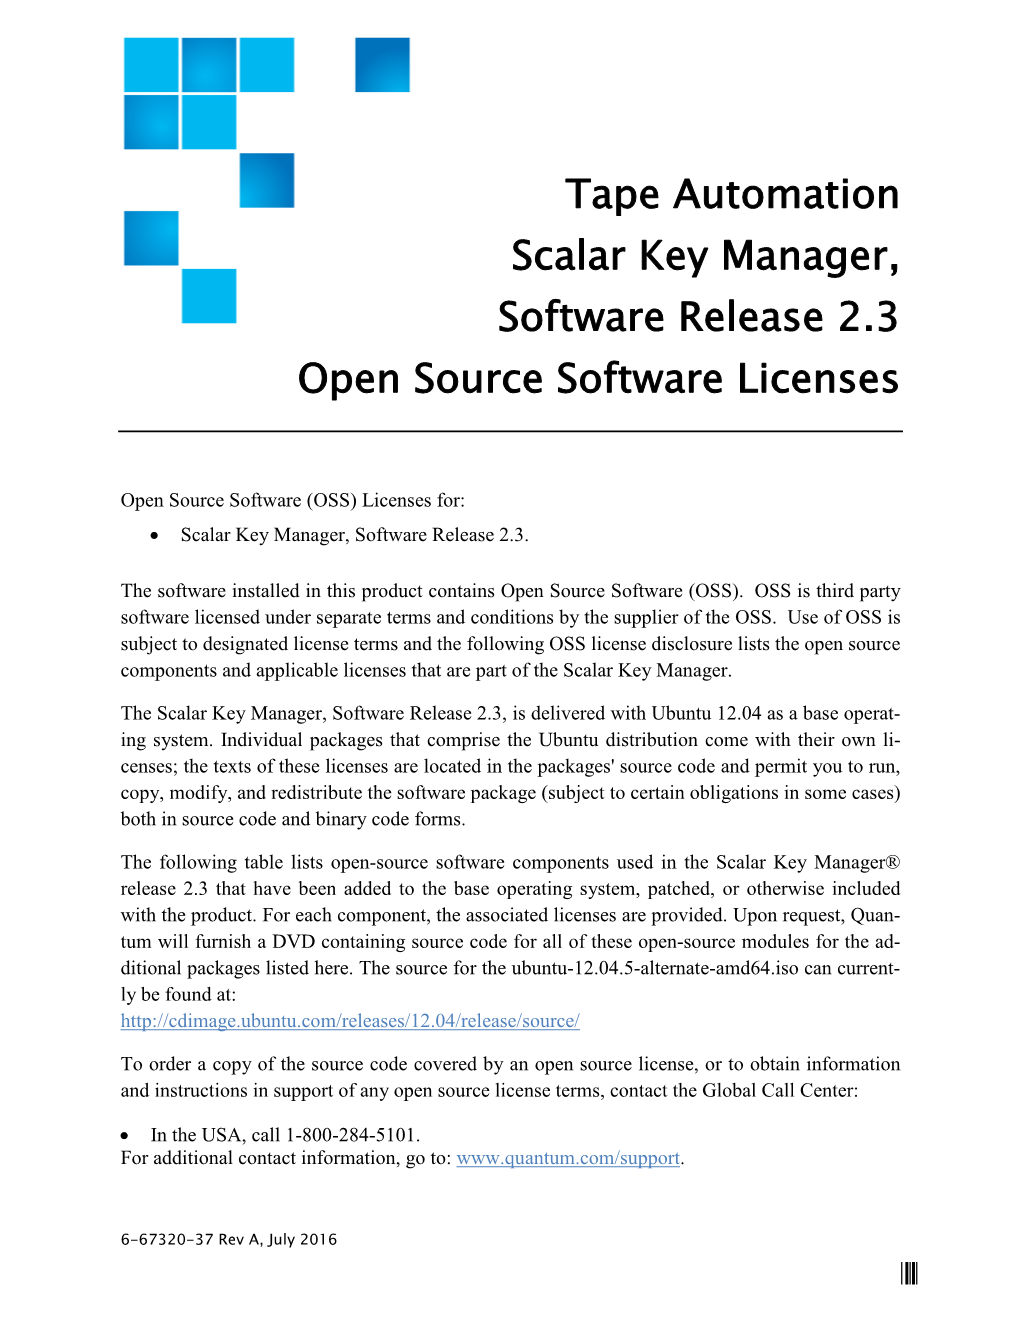 Scalar Key Manager, Software Release 2.3 Open Source Software Licenses